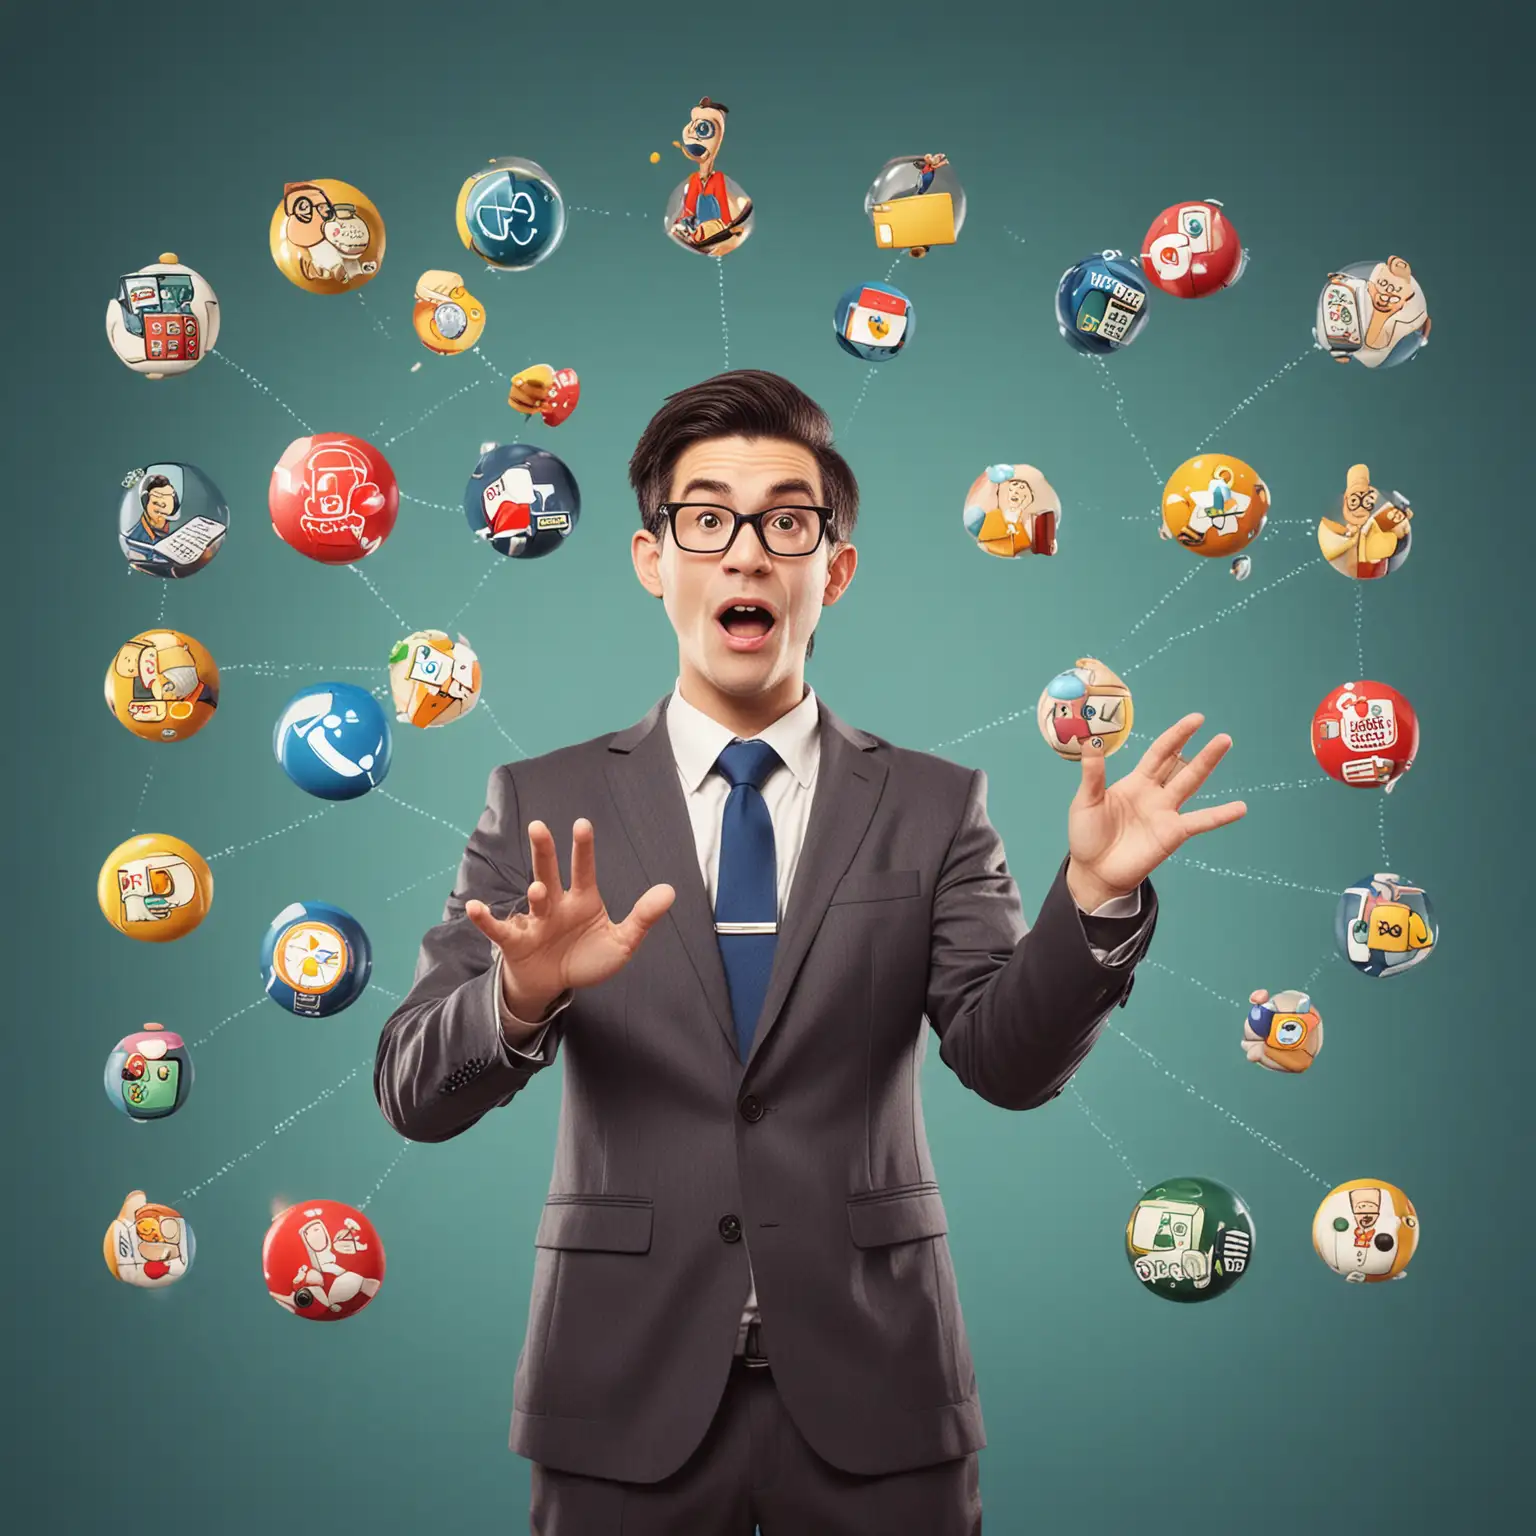 Humorous Business Juggler with Vibrant Icons Colorful Cartoon Style Image